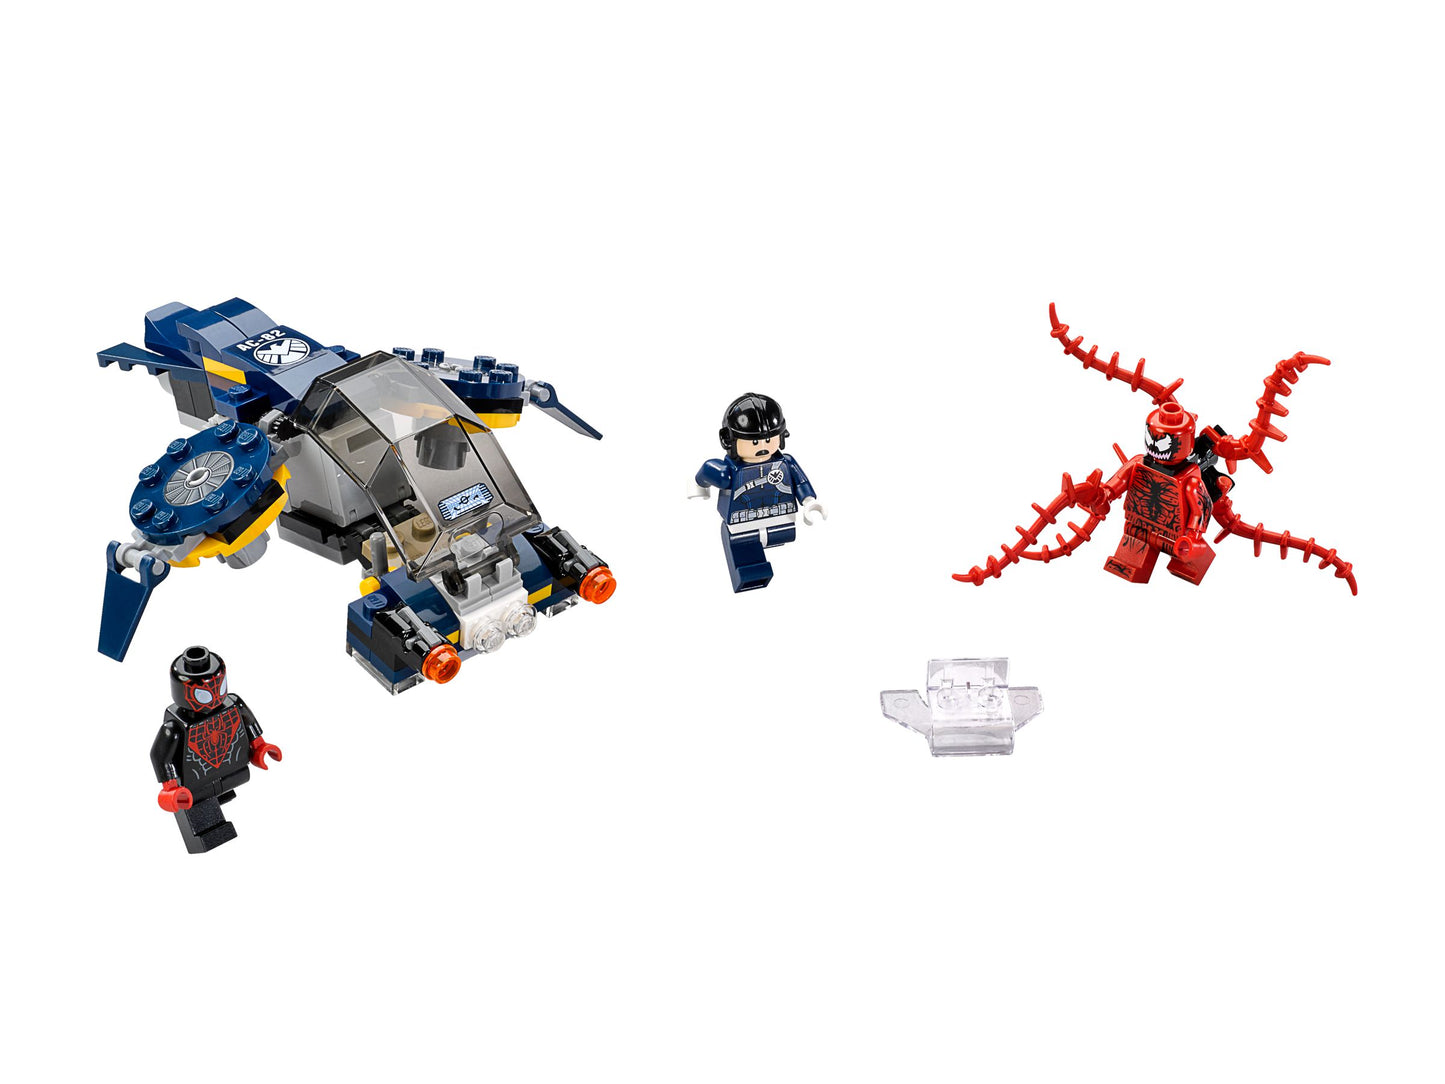 LEGO® EOL Super Heroes 76036 Carnages Attacke auf SHIELD